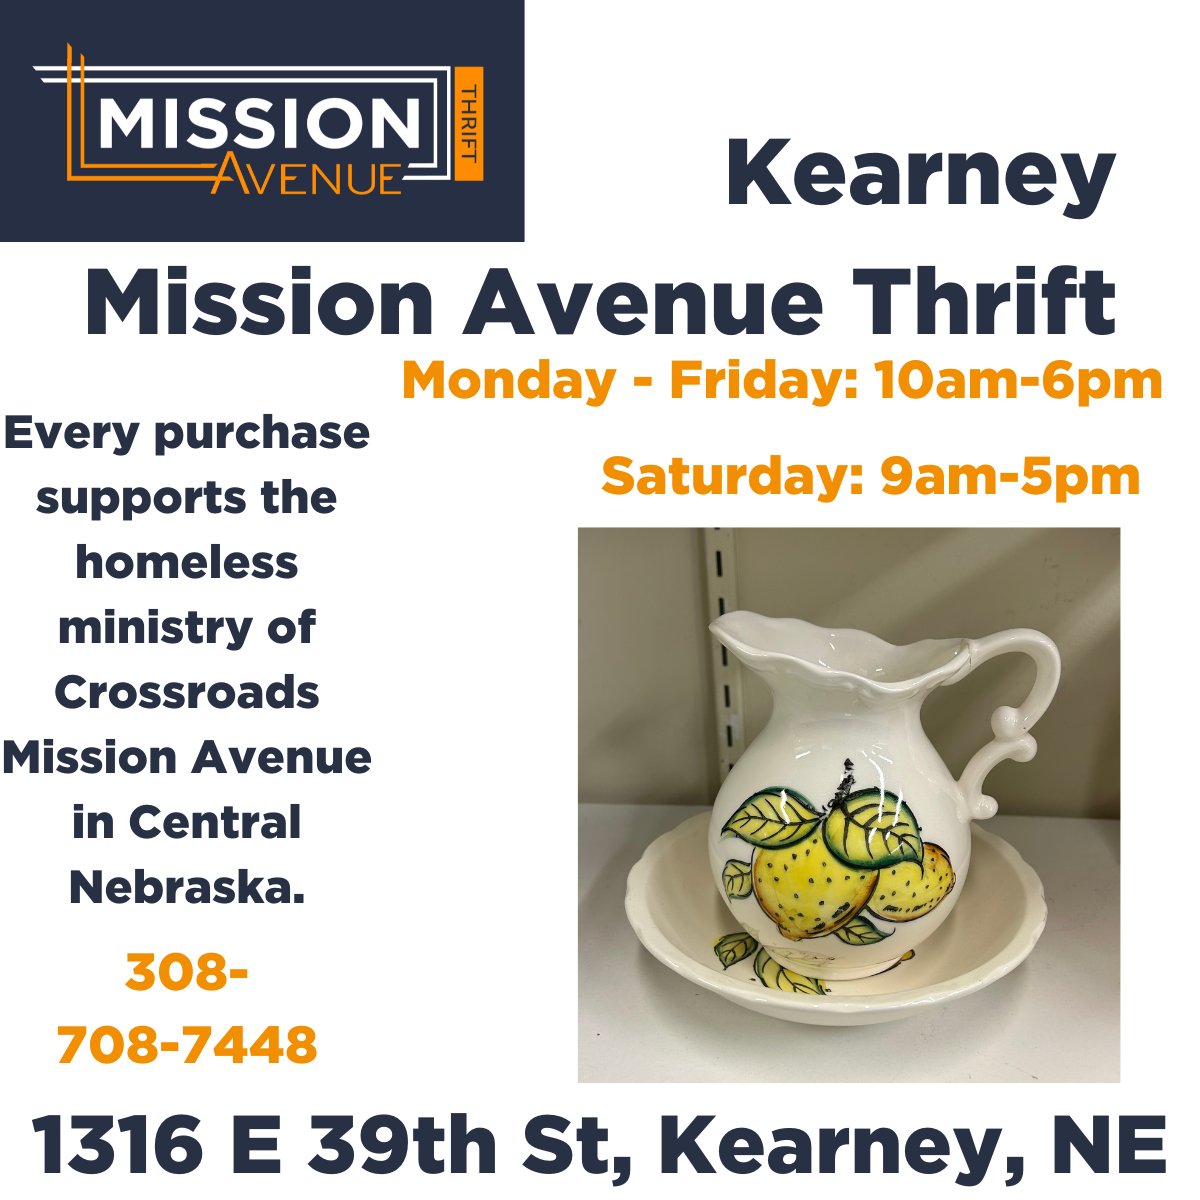 Come in TODAY and see what's NEW at Kearney Mission Avenue Thrift! crossroadsmission.com/thrift-stores/ #MissionAvenueThrift #KearneyNebraska #Thriftstore #Shoptoday